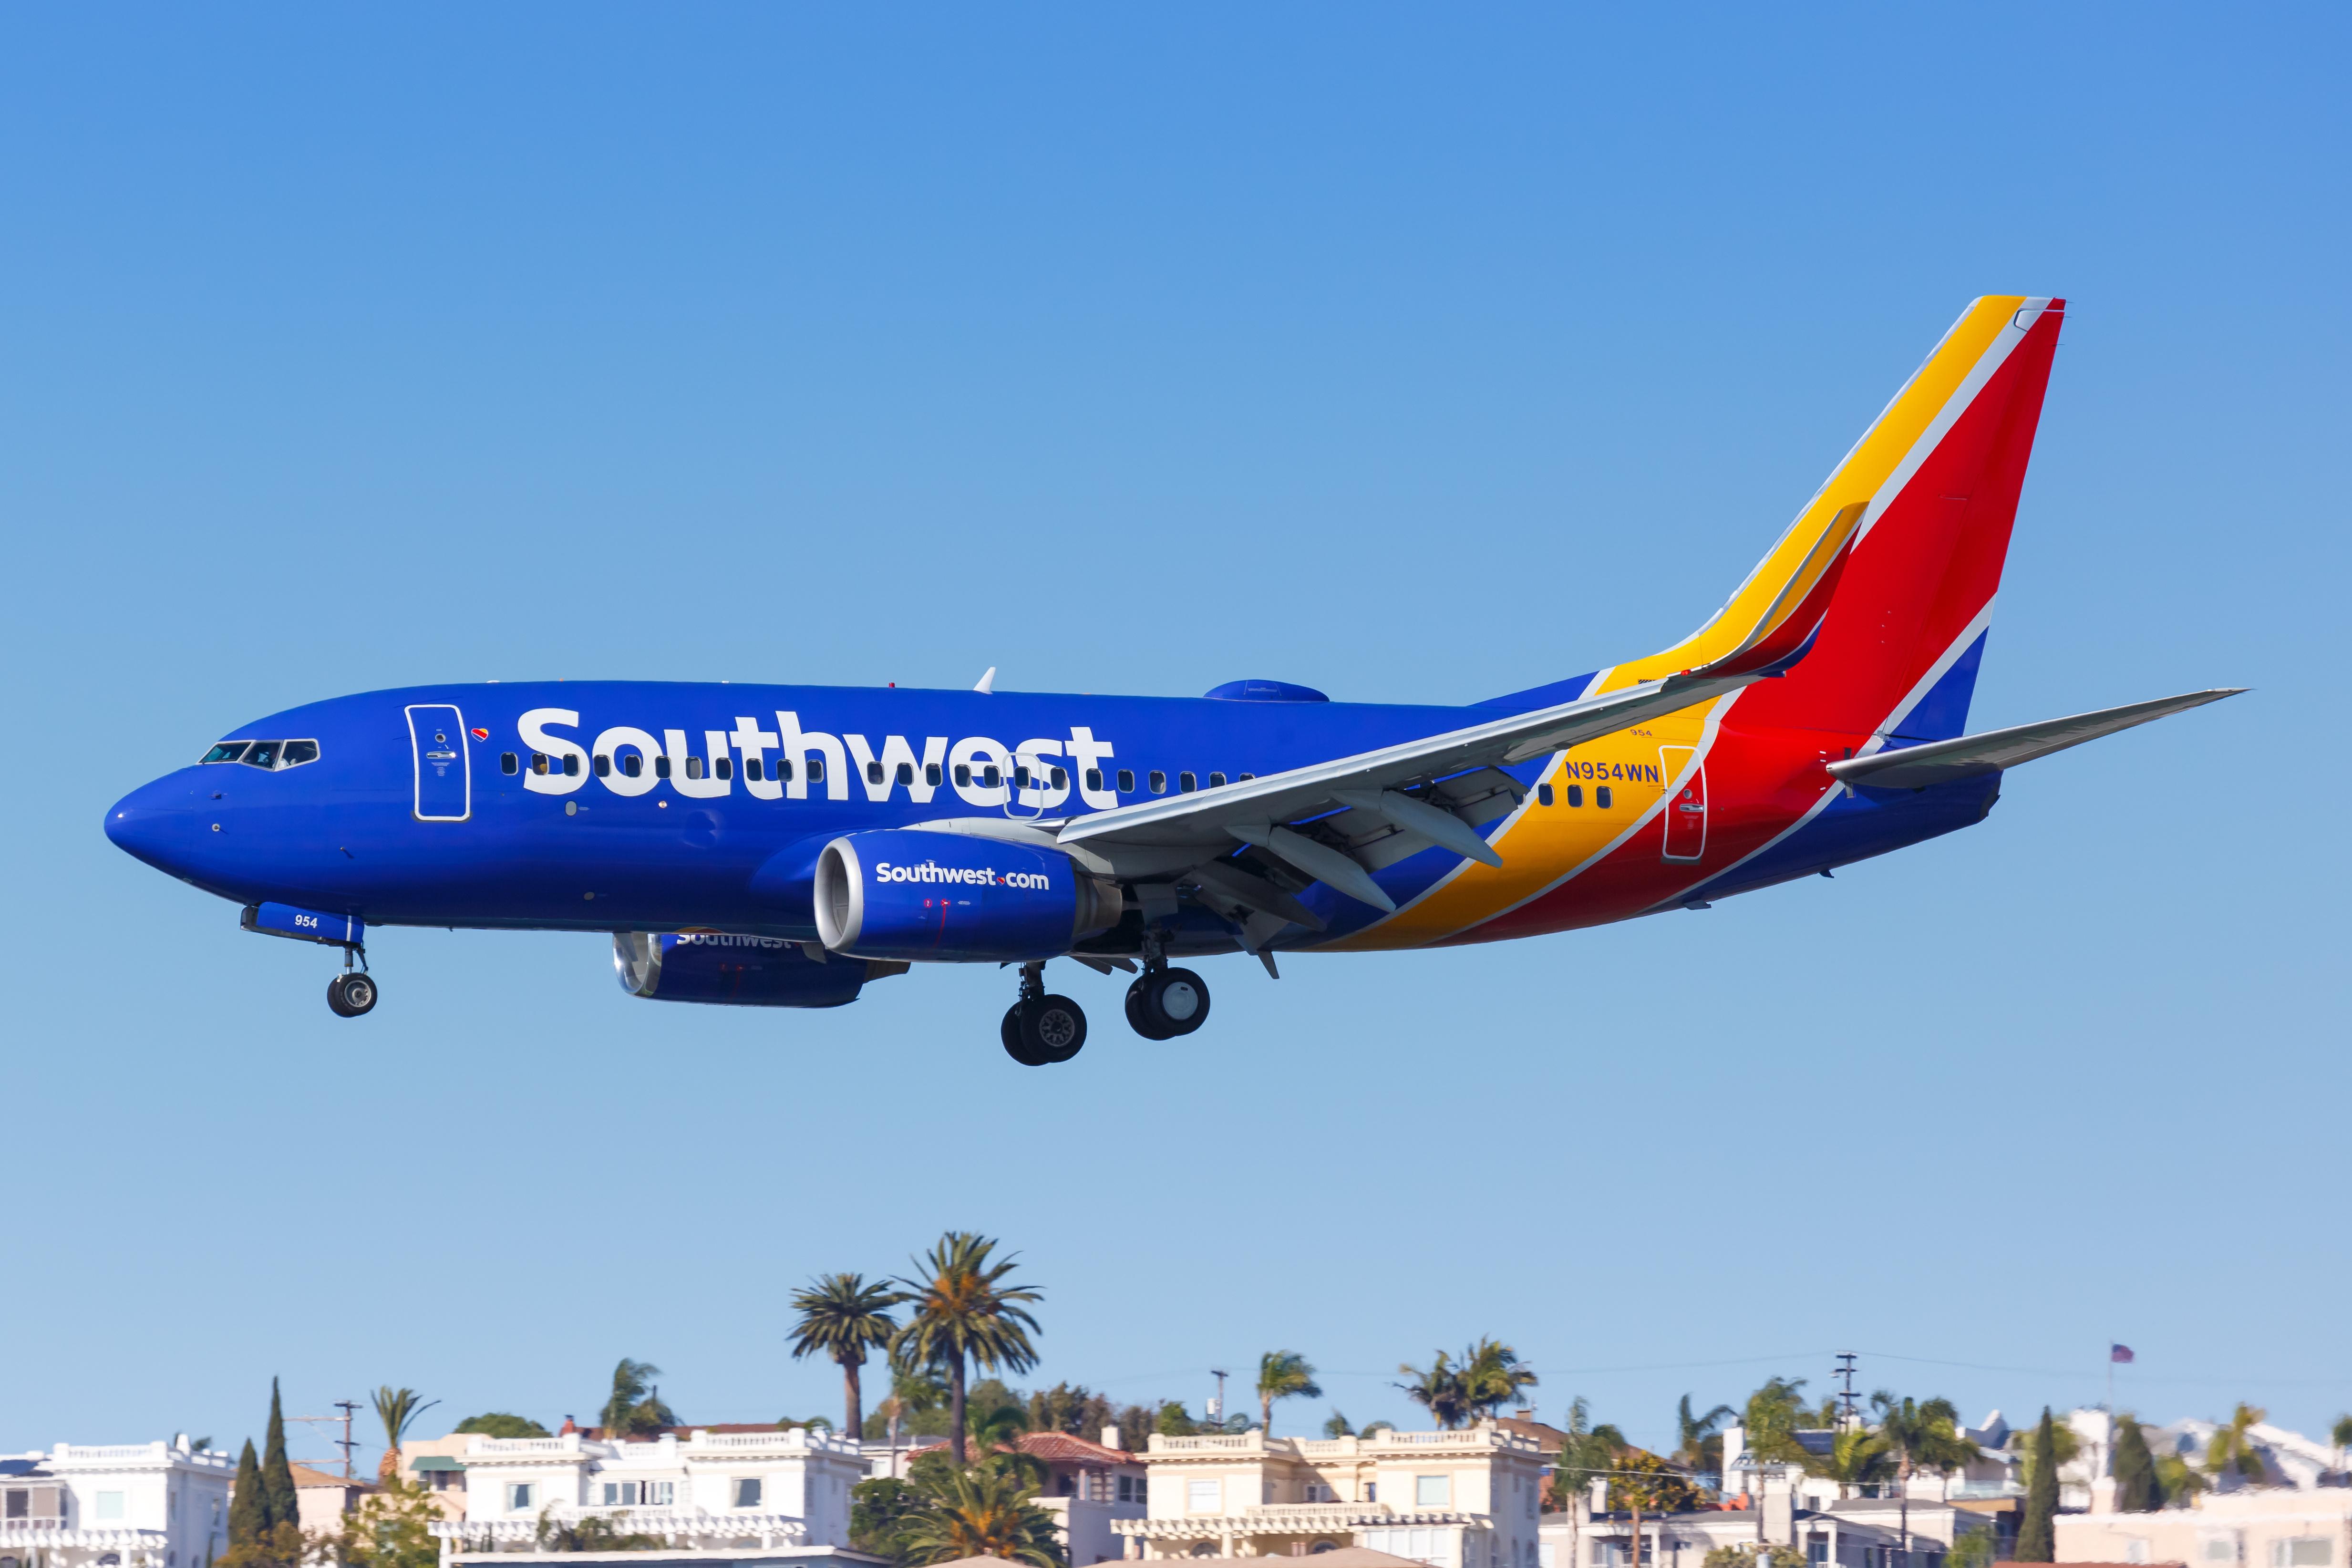 southwest airlines low fare